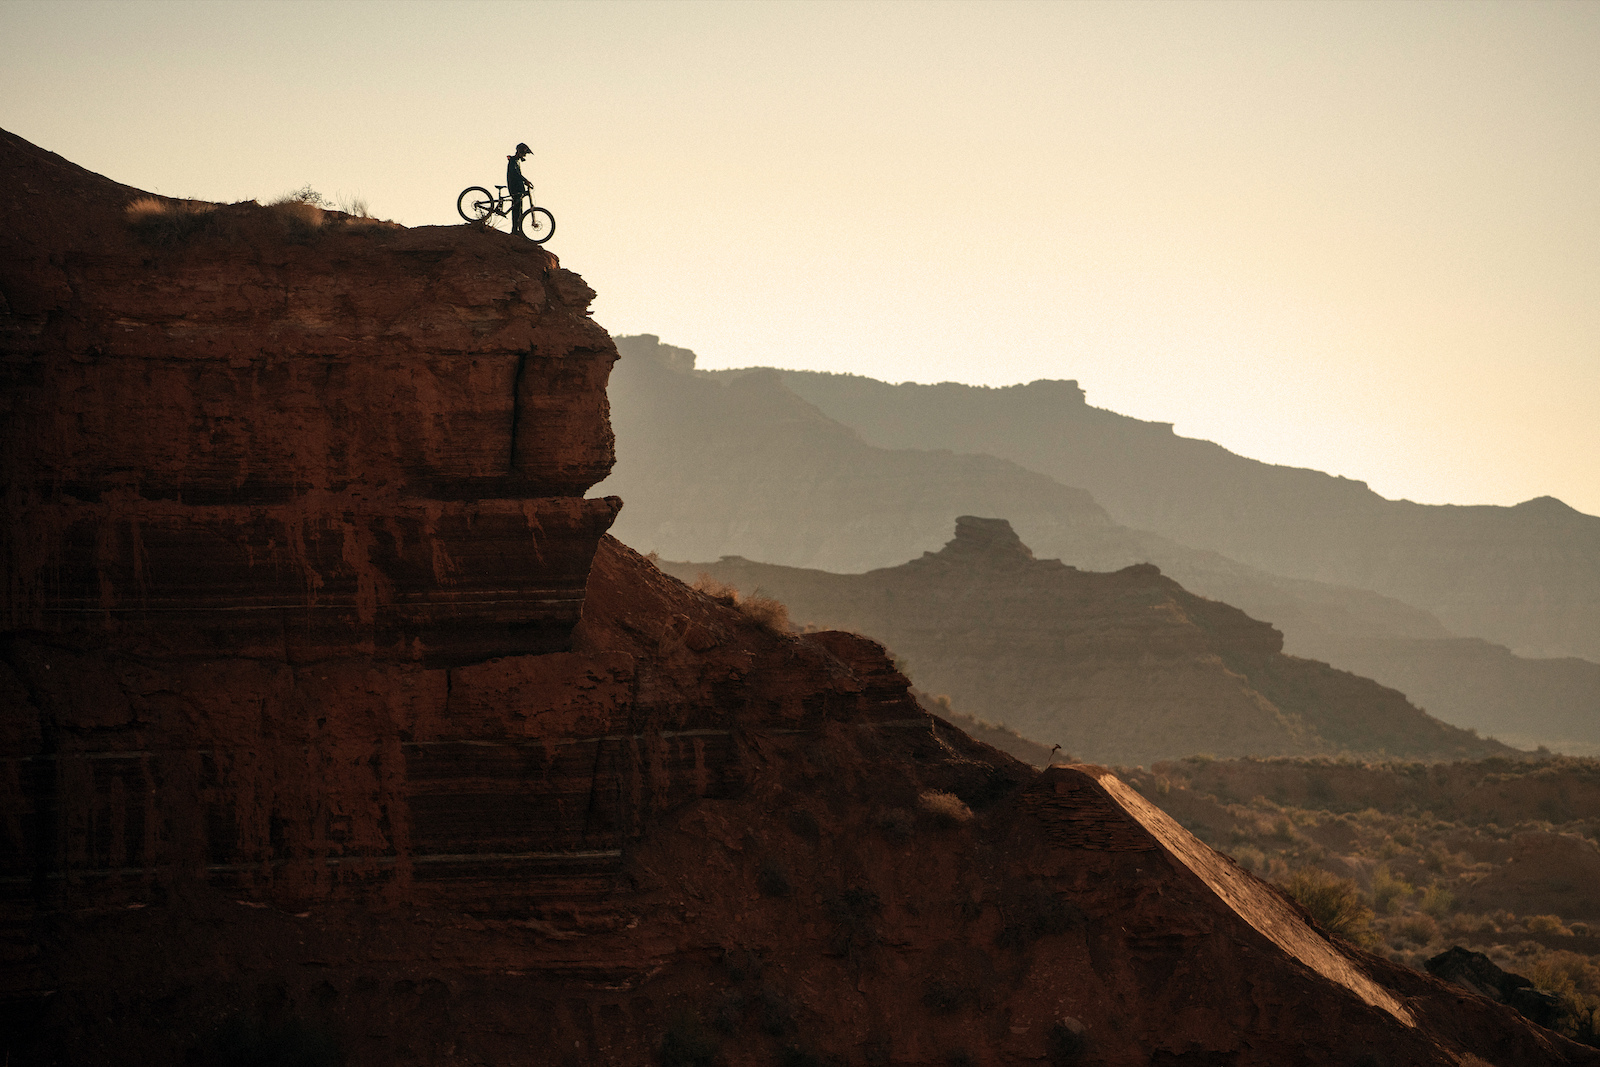 Reed Boggs in Virgin Utah during the filming of Riding Off Cliffs Sterling Lorence Photography